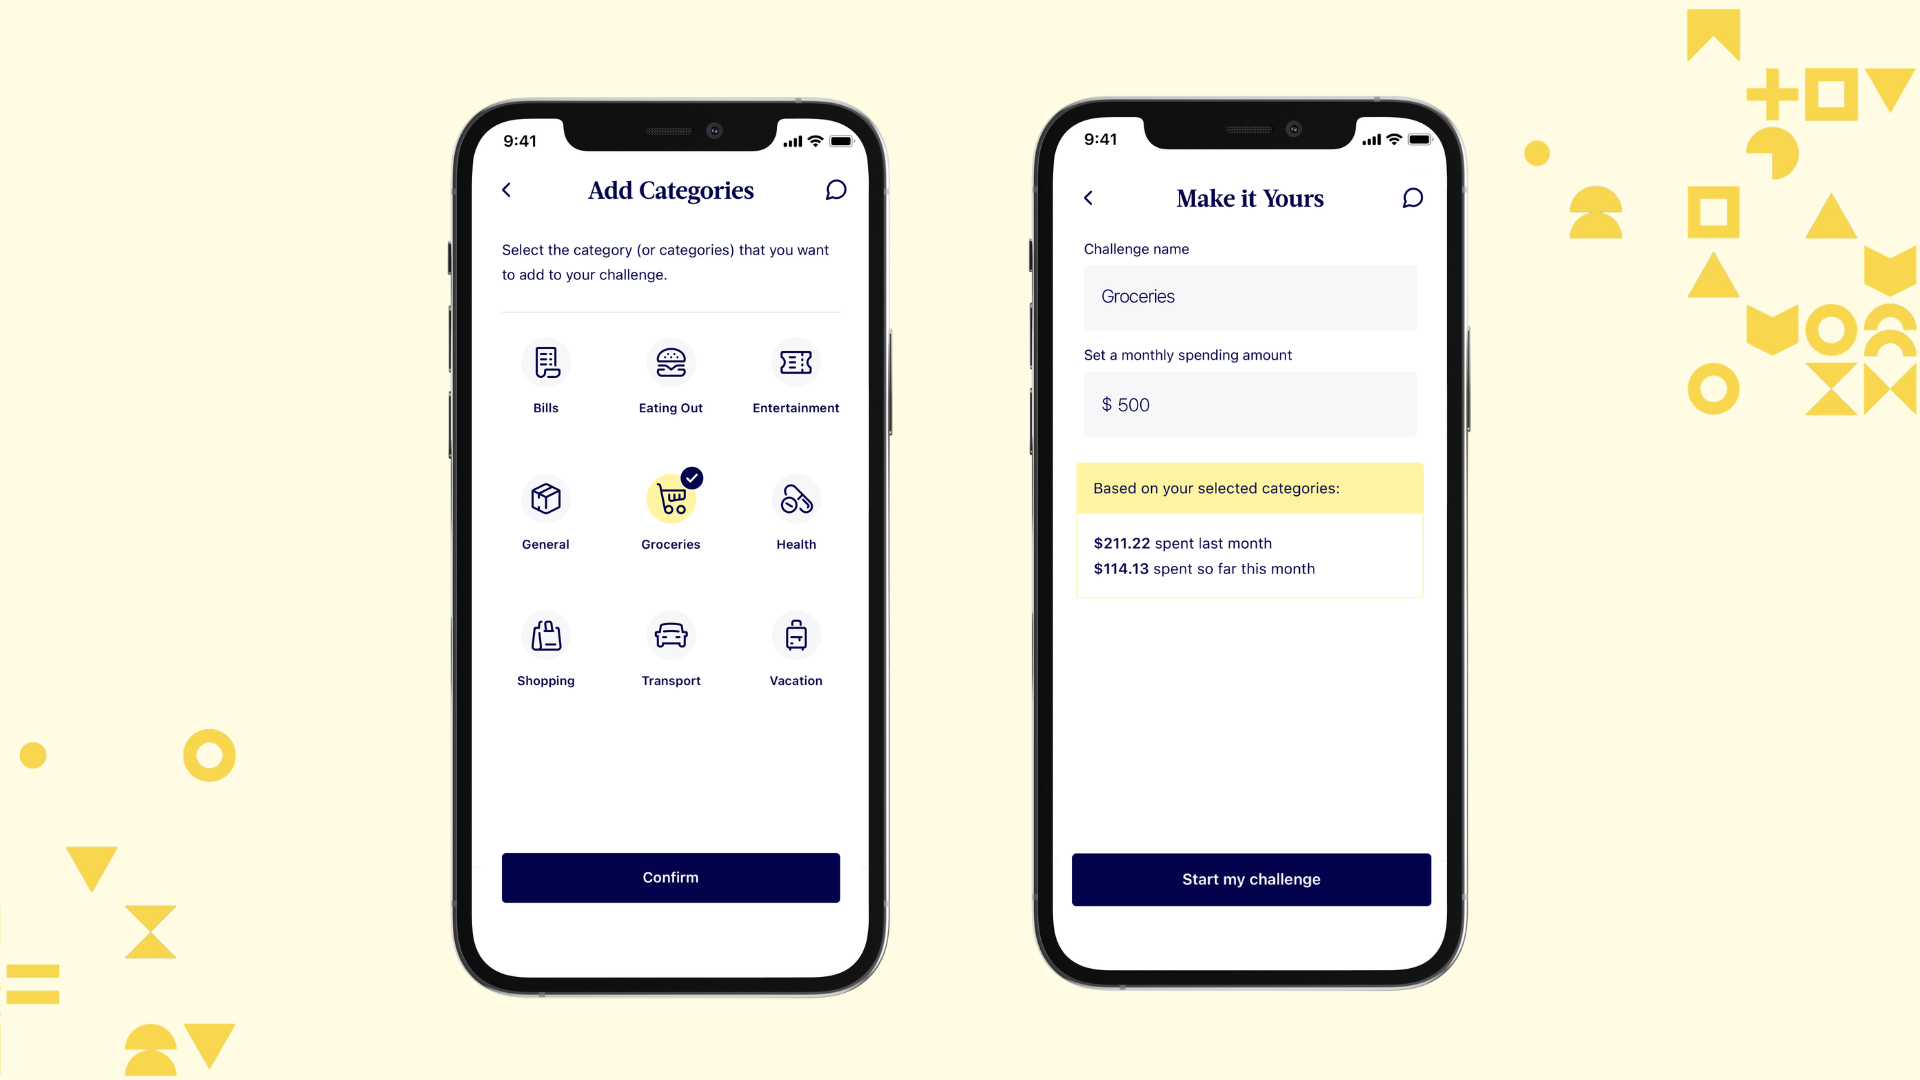 Image showing the Milli app creating a Spending Challege; first screen is adding the grocery category and the second screen has the fields to name the challenge, set a monthly spending amount, and showcases spend for the past month and so far this month.